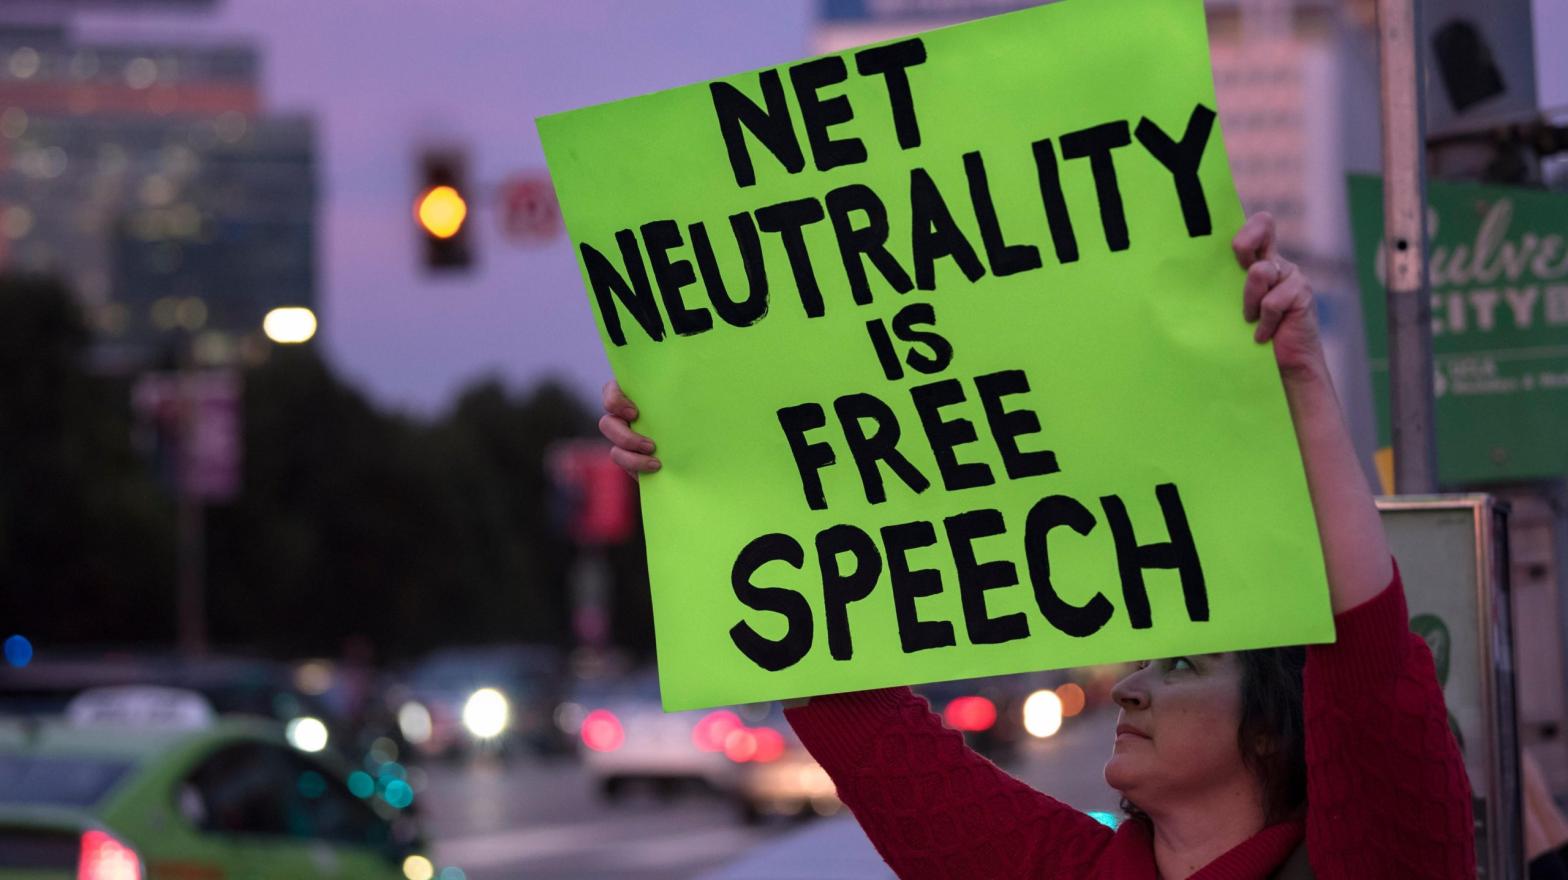 A pro-net neutrality protester outside a Federal Building in Los Angeles, California, in November 2017. (Photo: Ronen Tivony / NurPhoto via Getty Images, Getty Images)